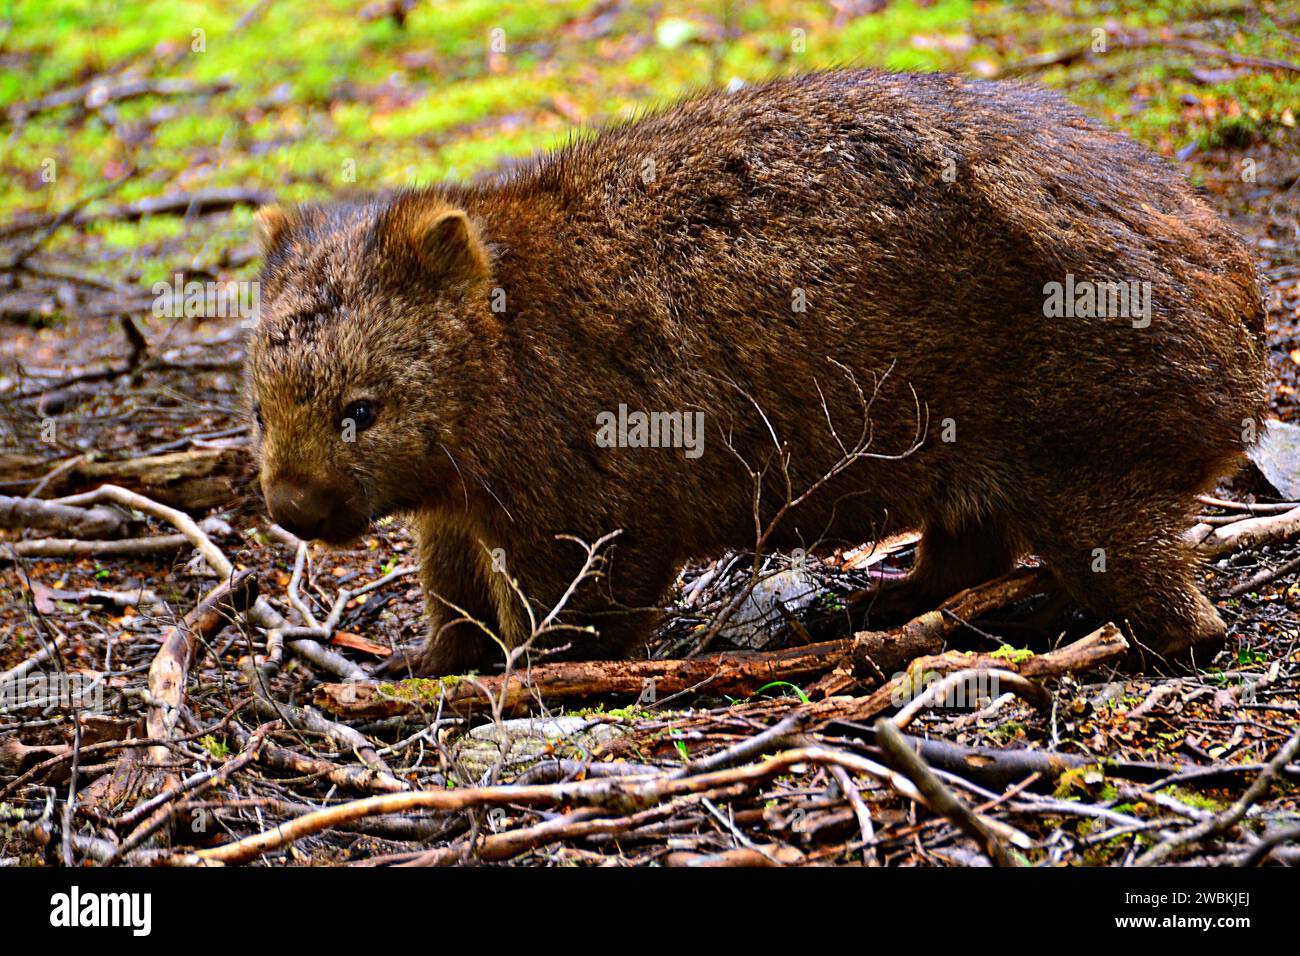 A wombat spotted in the wild really made the day felt awesome. Stock Photo